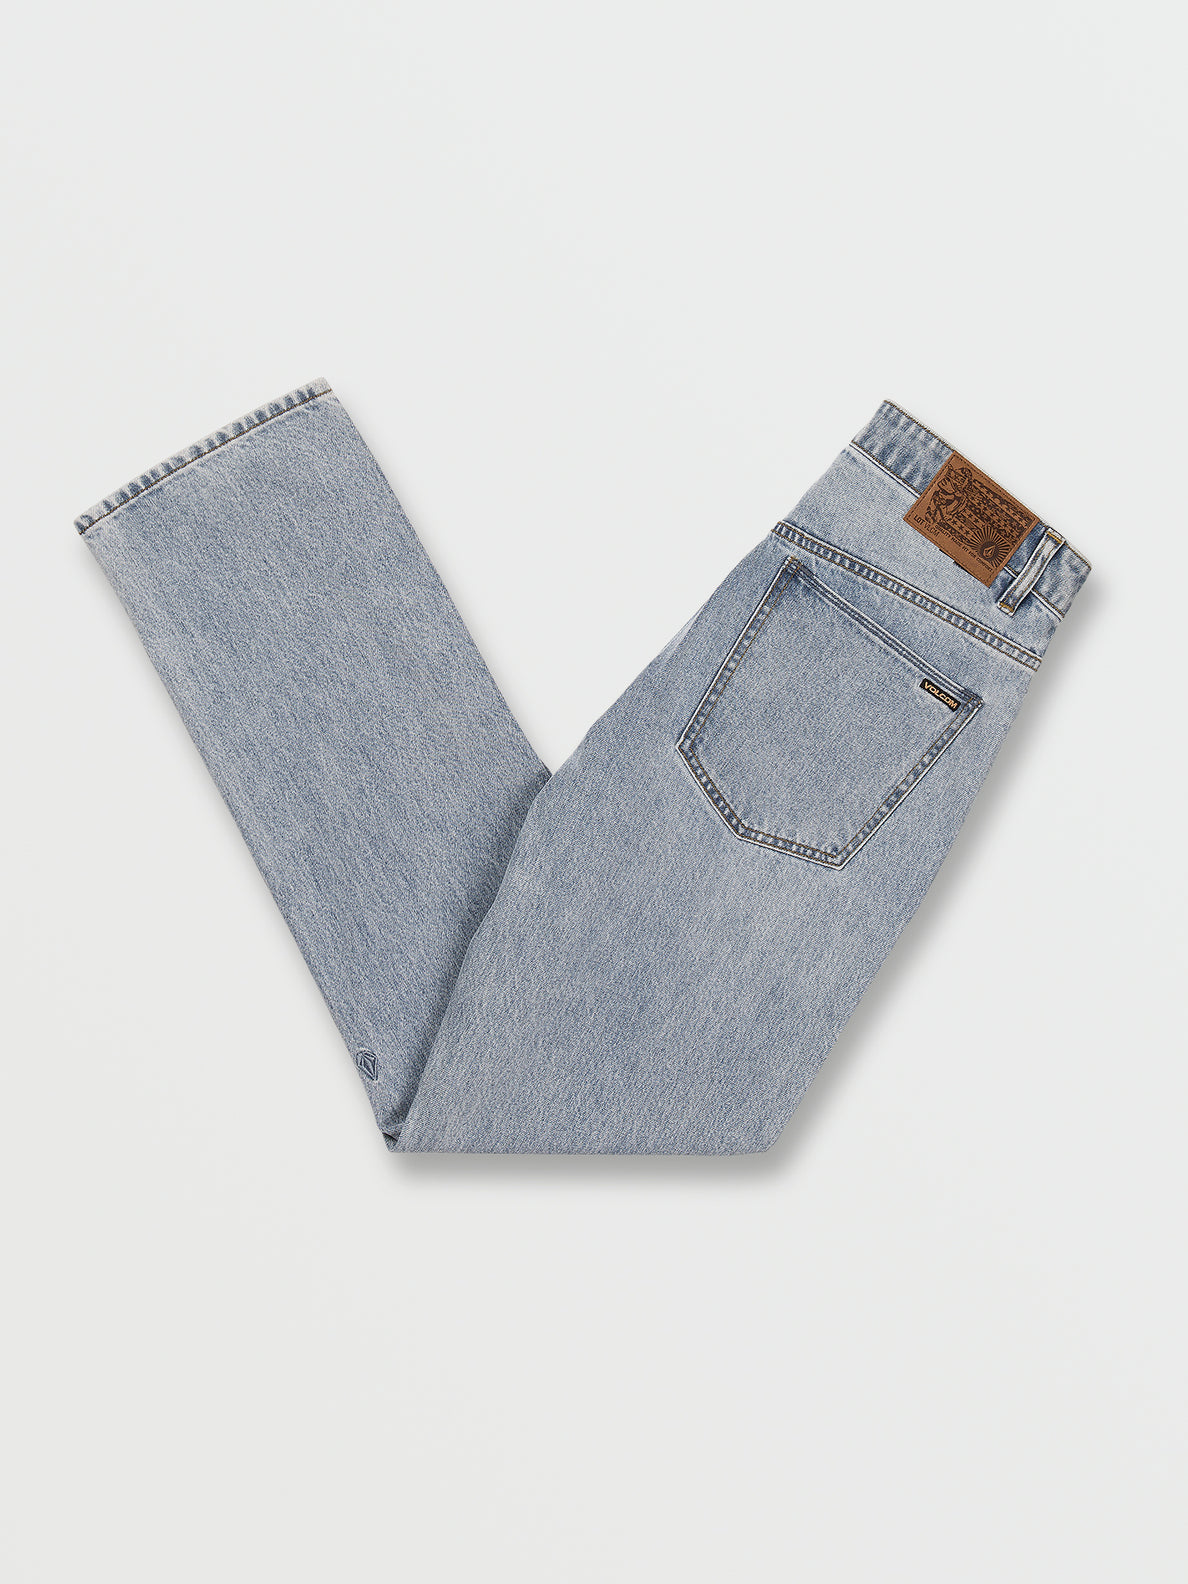 Solver Modern Fit Jeans - Heavy Worn Faded (A1932204_HWR) [B]